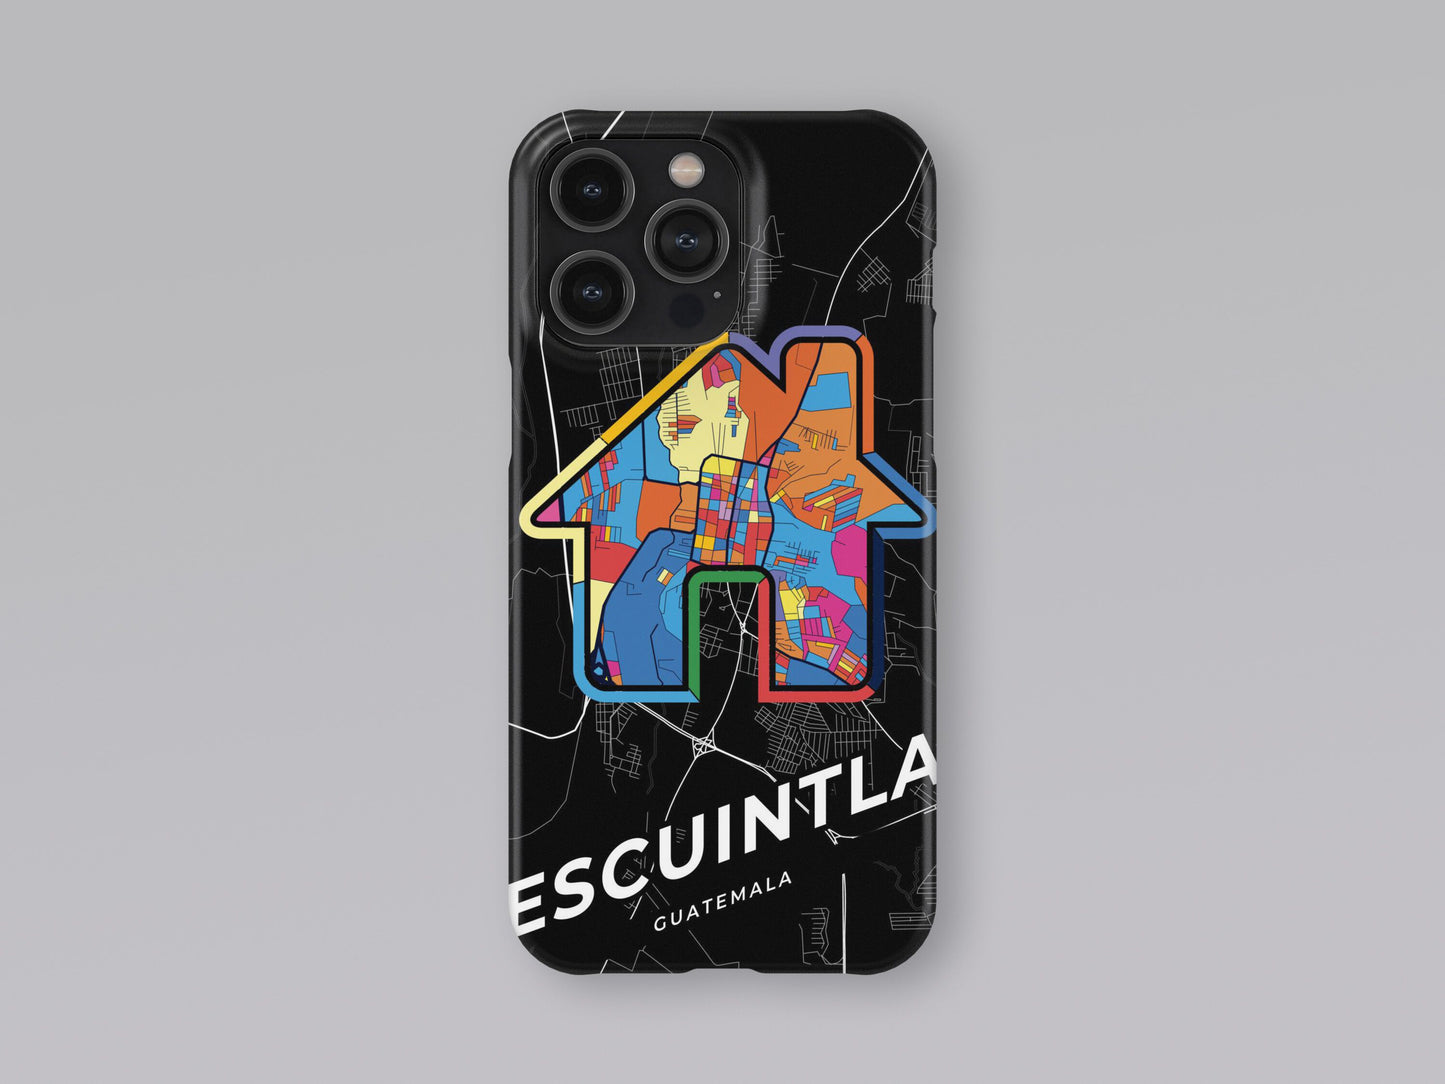 Escuintla Guatemala slim phone case with colorful icon. Birthday, wedding or housewarming gift. Couple match cases. 3